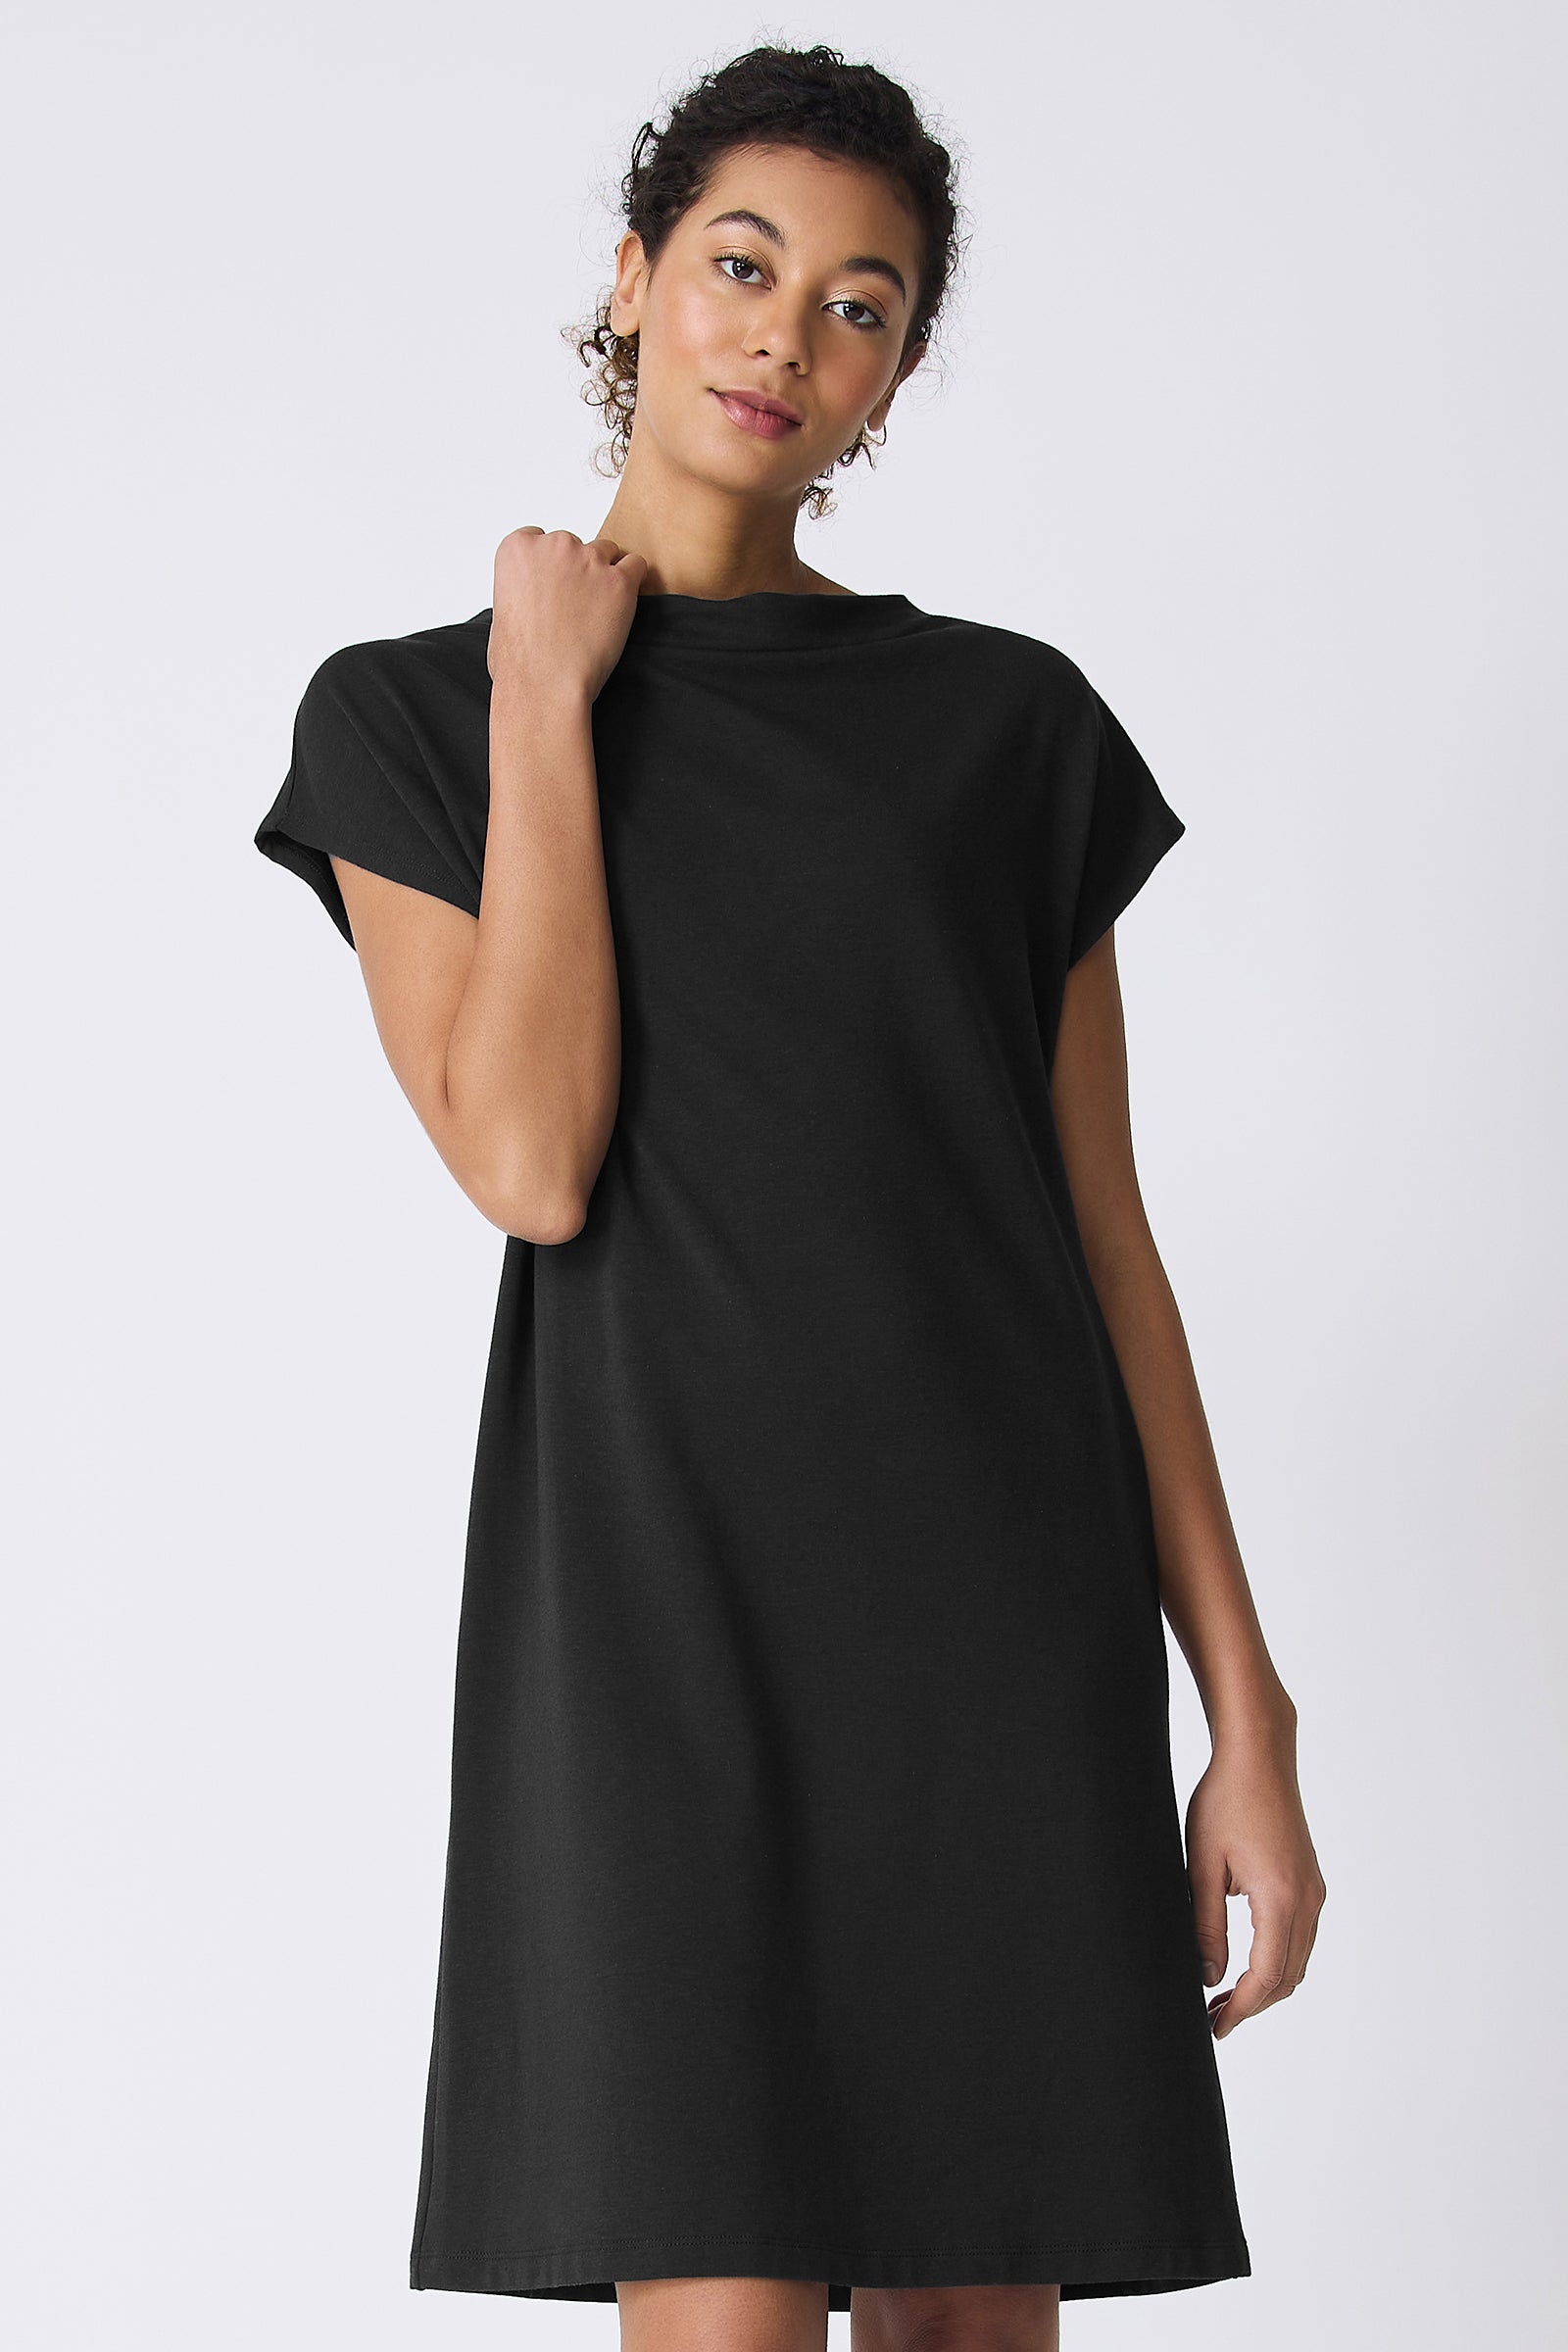 Kal Rieman Luca Cowl Dress in Black on model touching collar front view